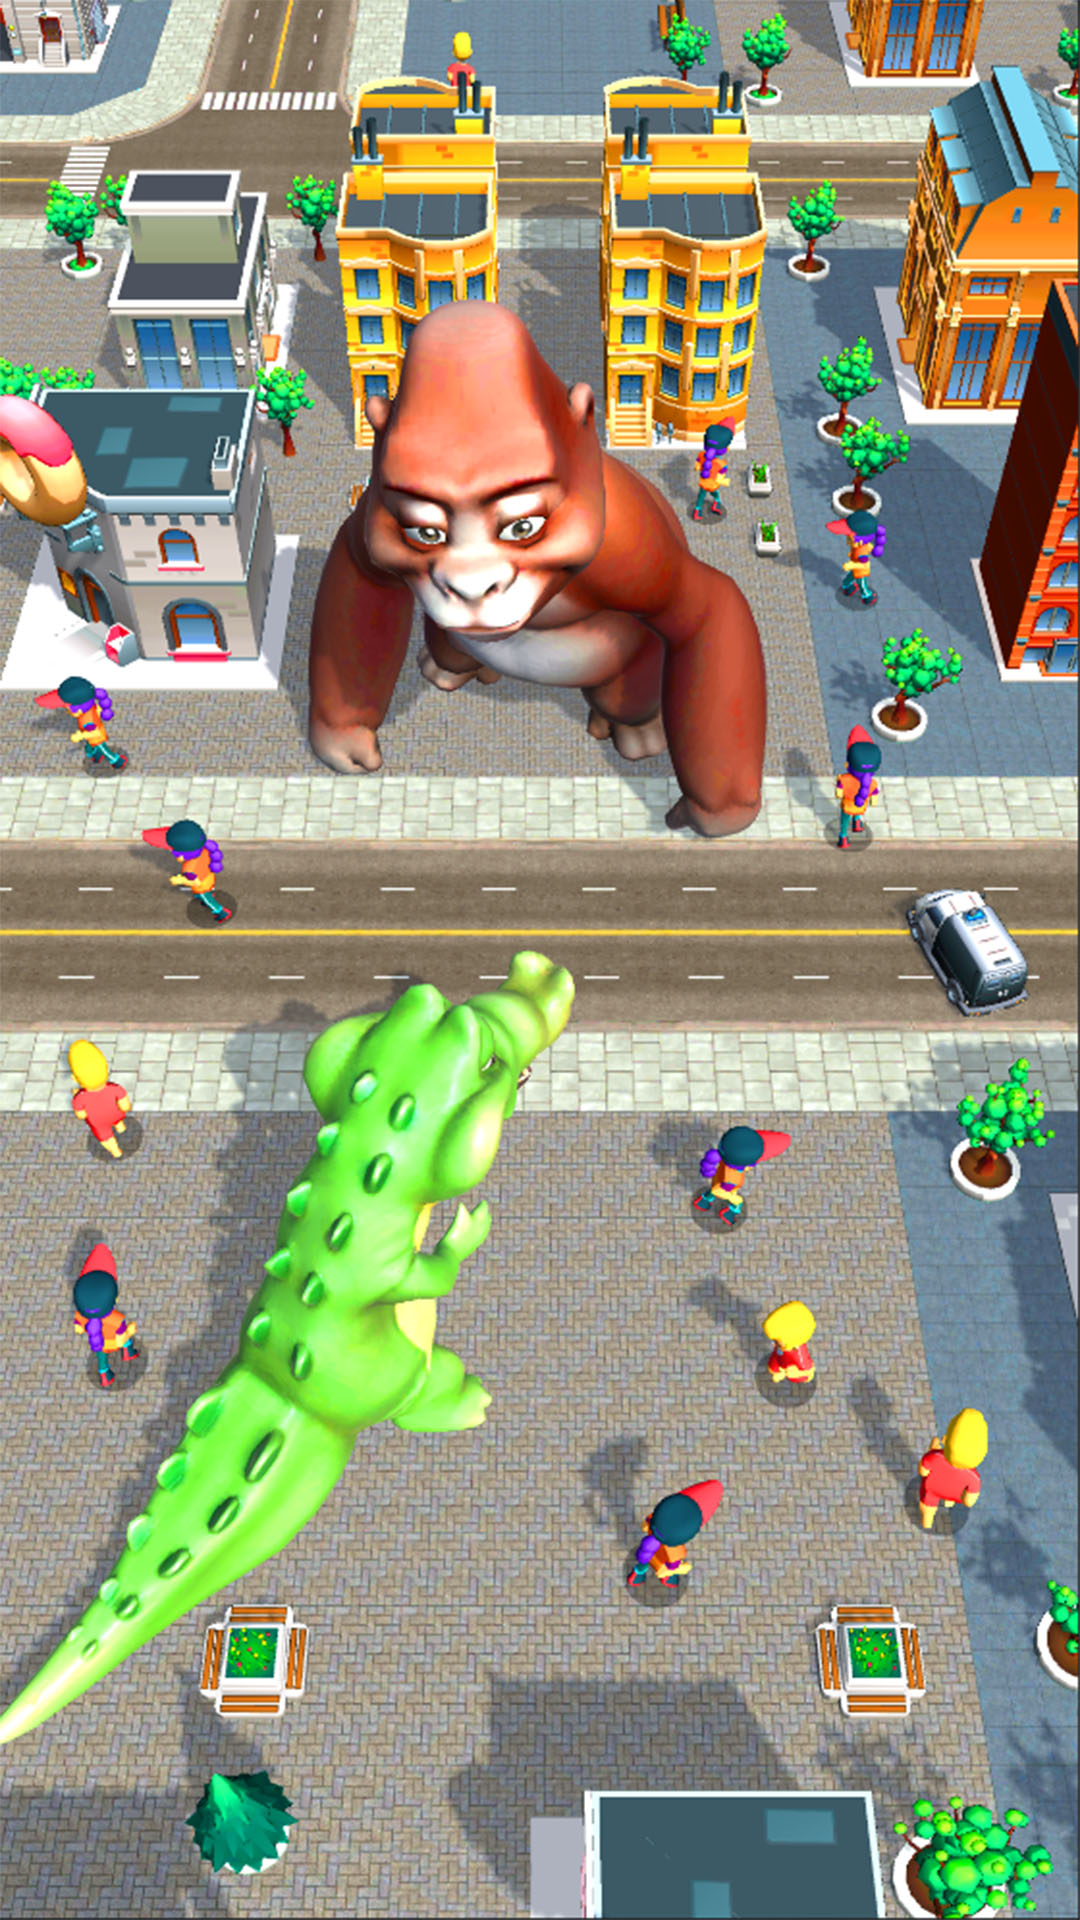 Baixar Rampage : Giant Monsters para Android grátis.